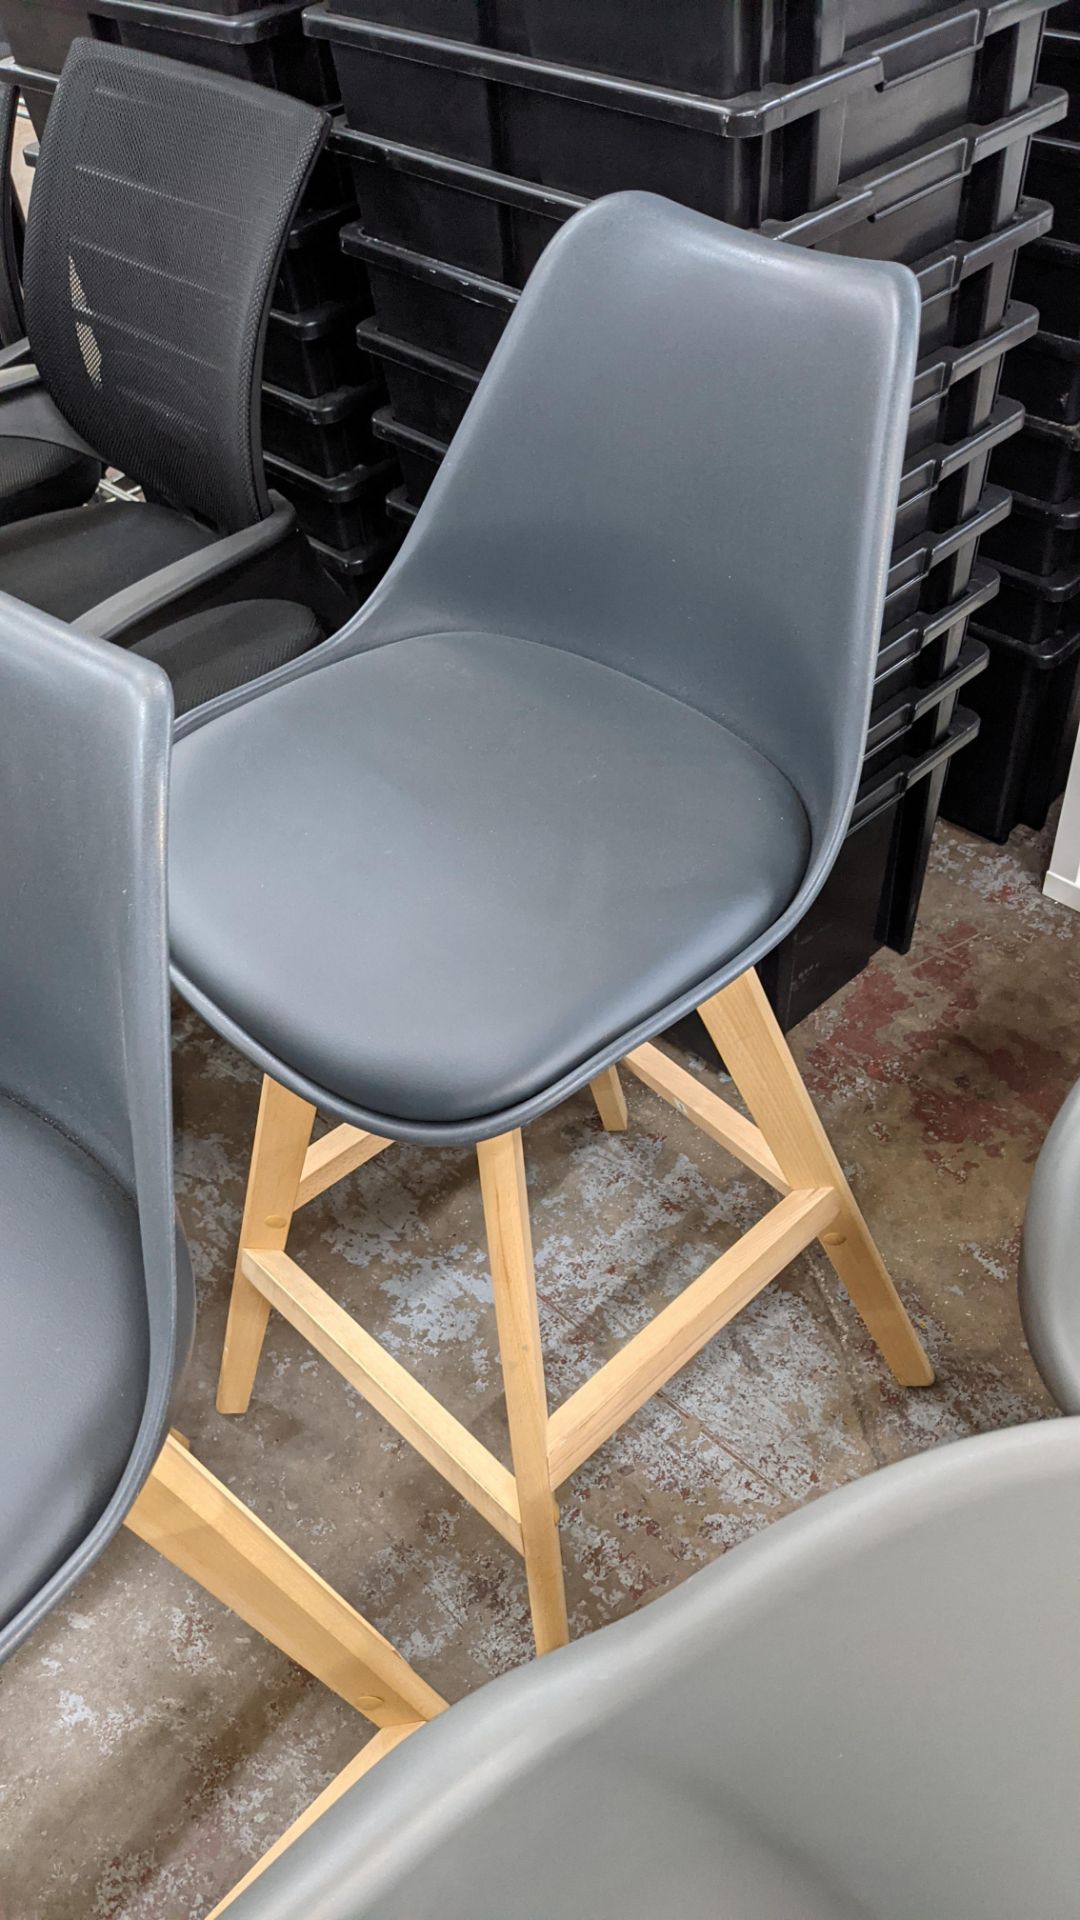 Pair of matching high backed stools each comprising wooden frame with dark grey plastic seat & padde - Image 5 of 5